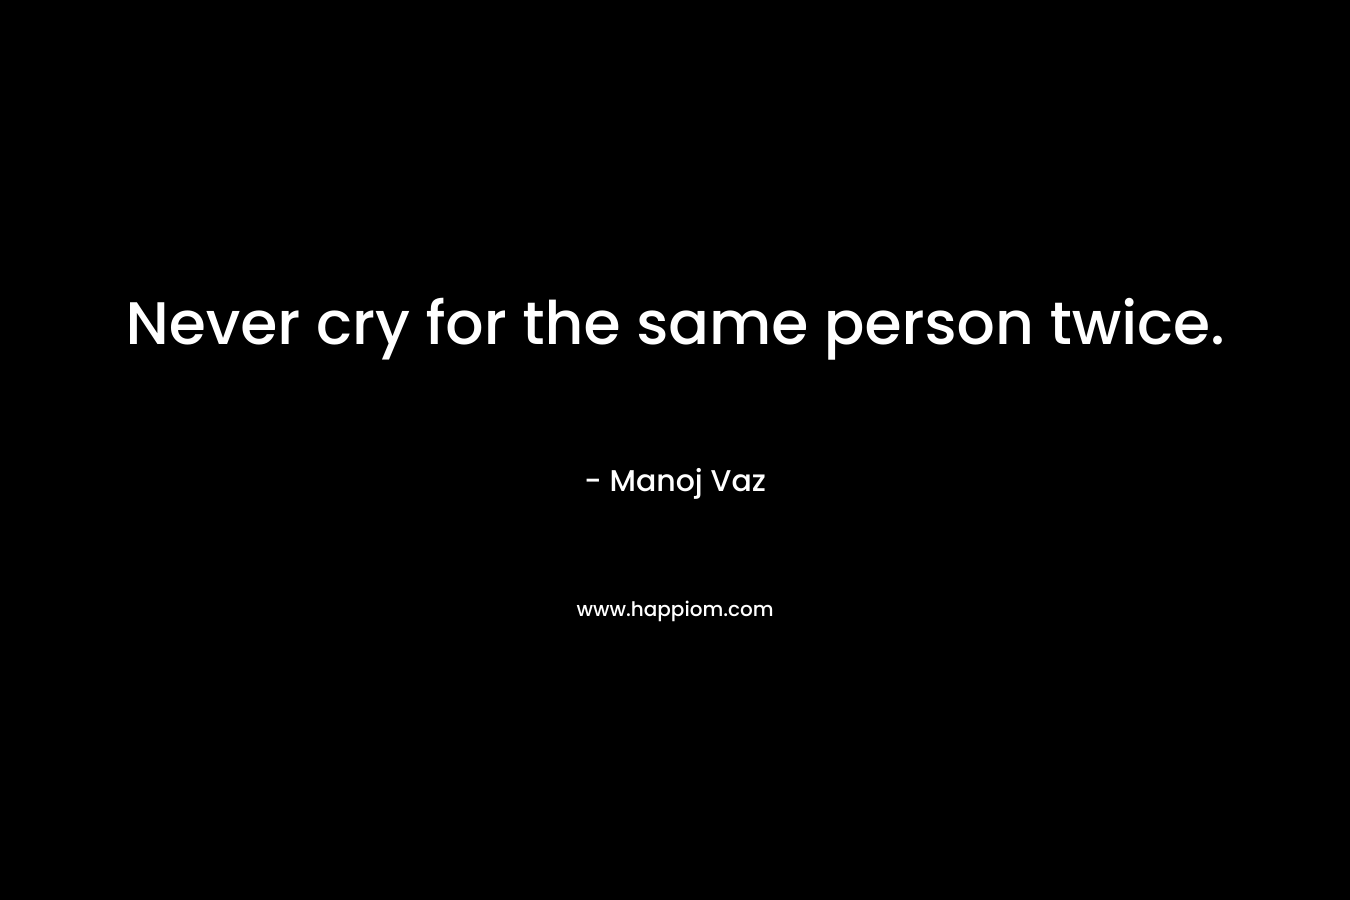 Never cry for the same person twice.